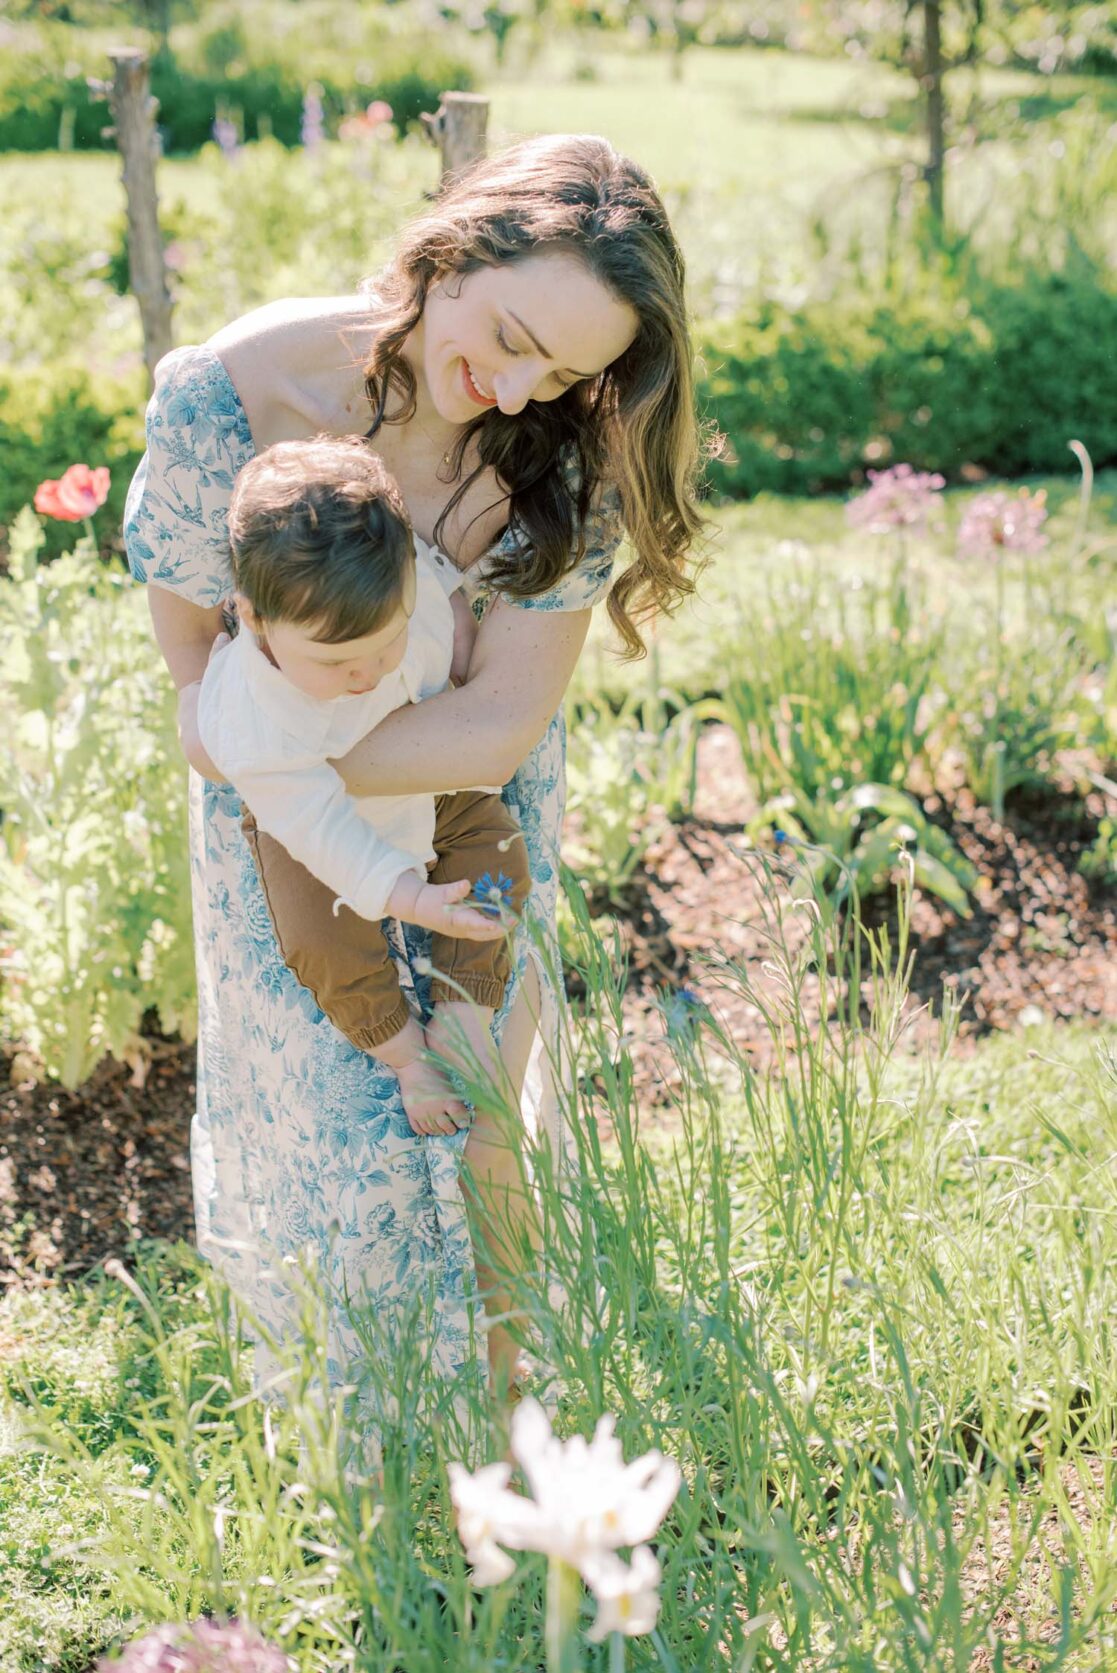 Photo of mom holding her baby son in a garden while he picks flowers by Richmond baby photographer Jacqueline Aimee Portraits